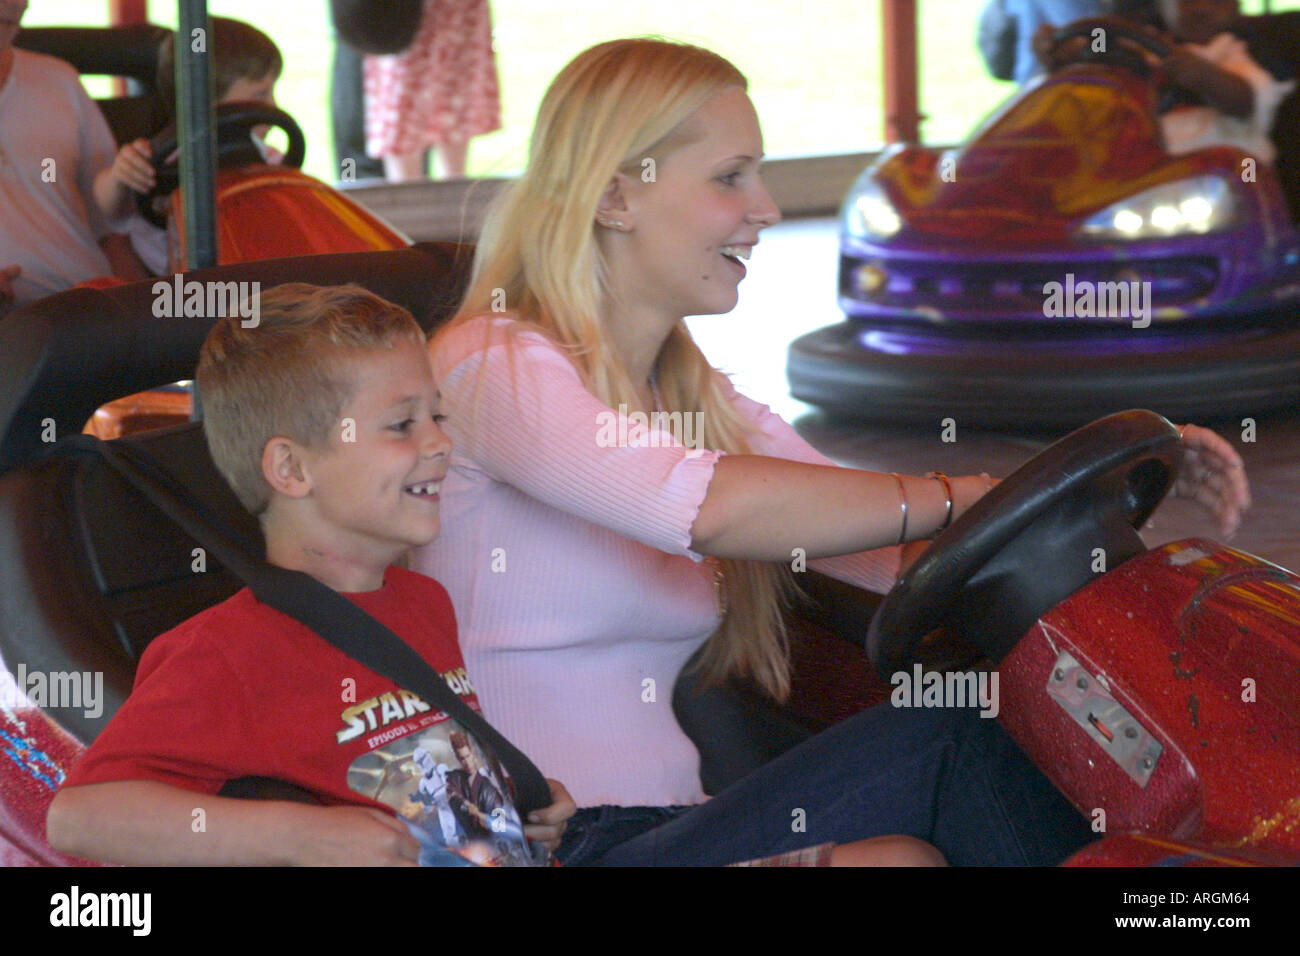 Mother and son playing on bumper cars in a funfair Stock Photo